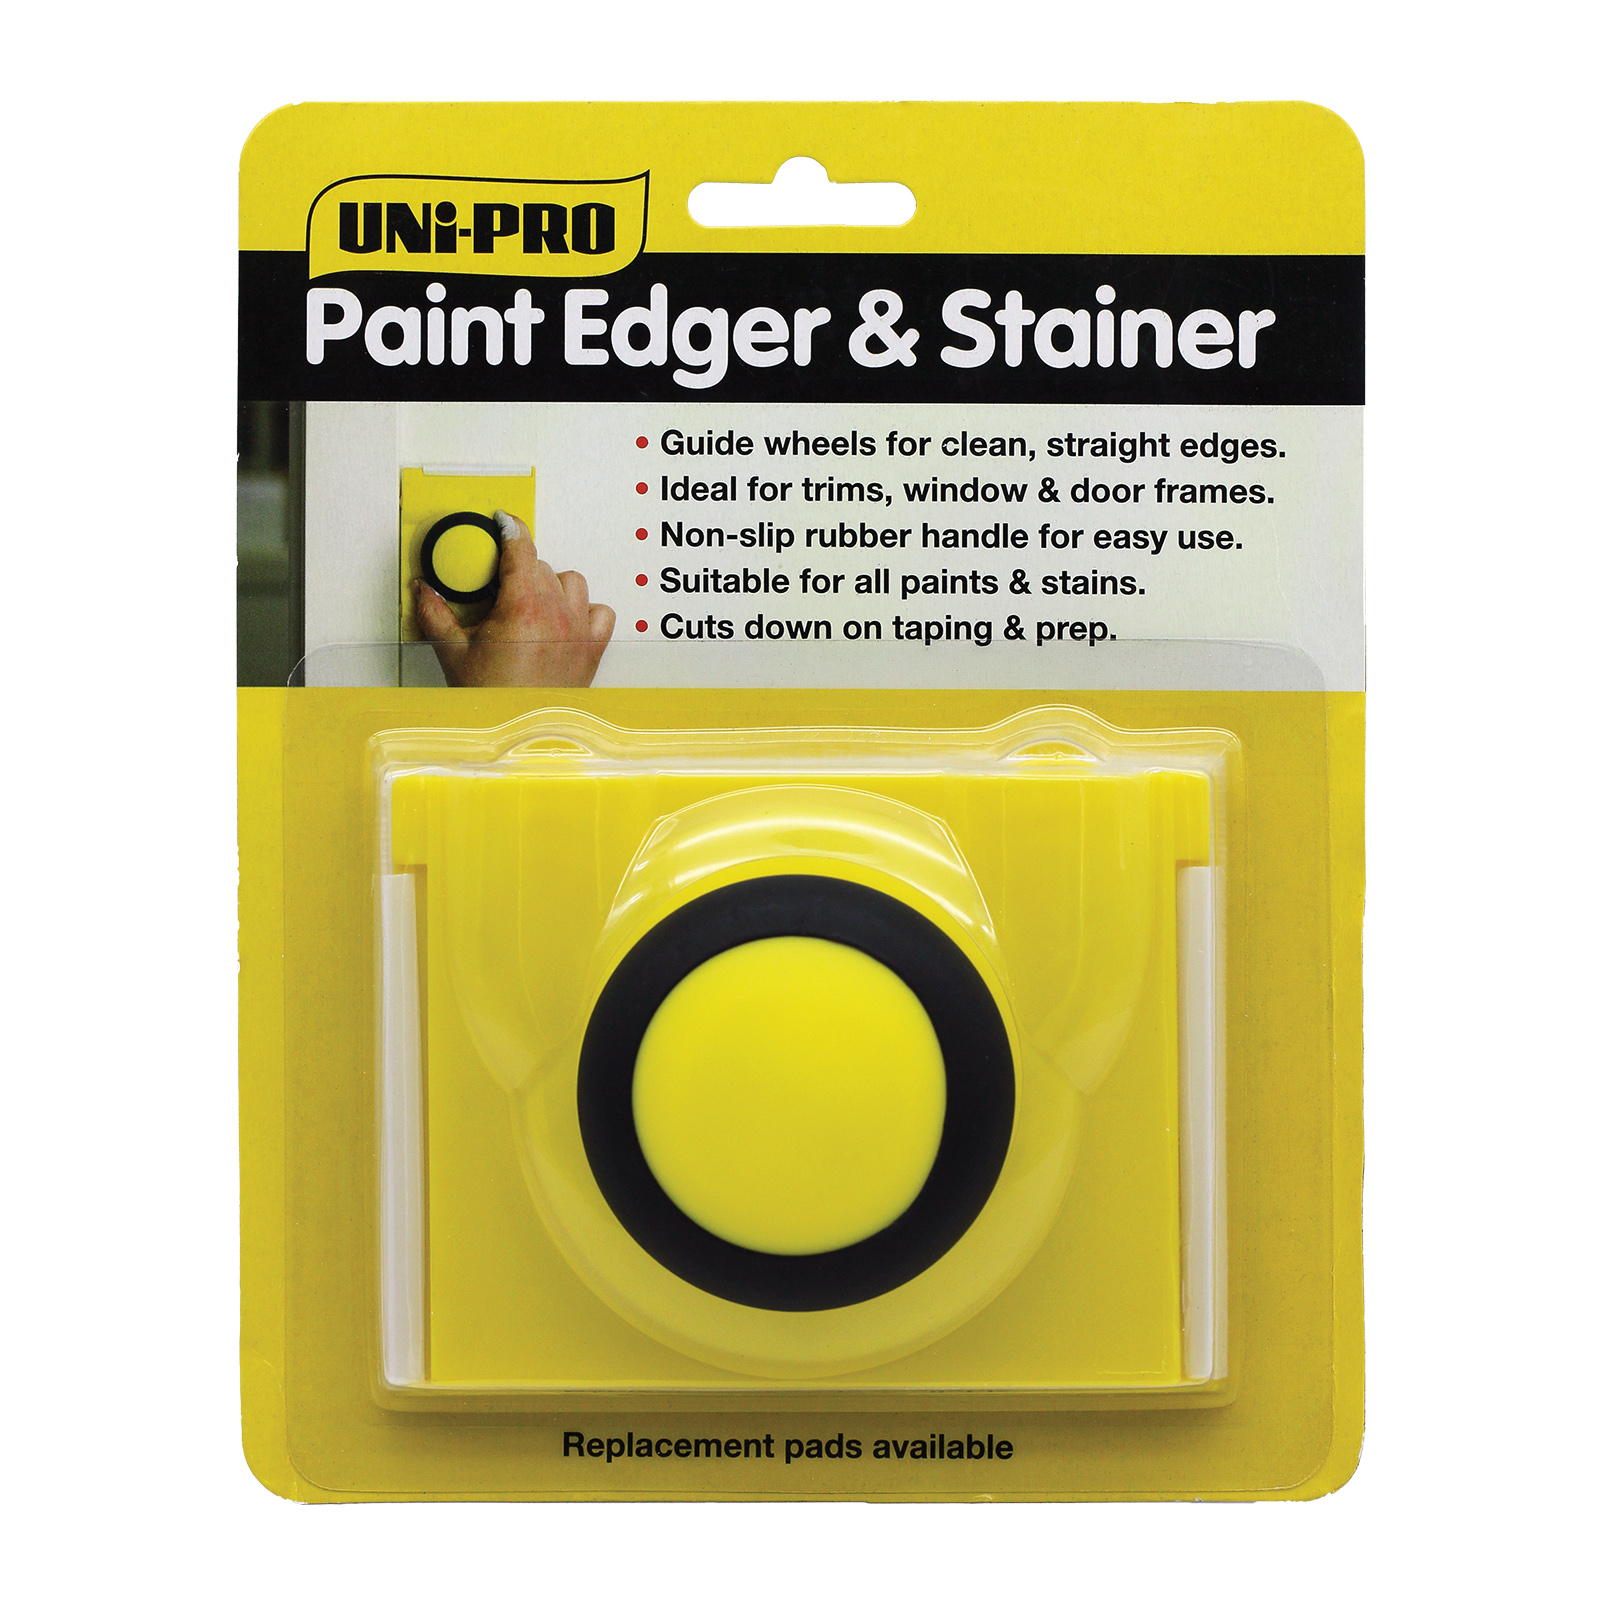 UNi-PRO Paint Edger & Stainer With Guide Wheels - Unipro